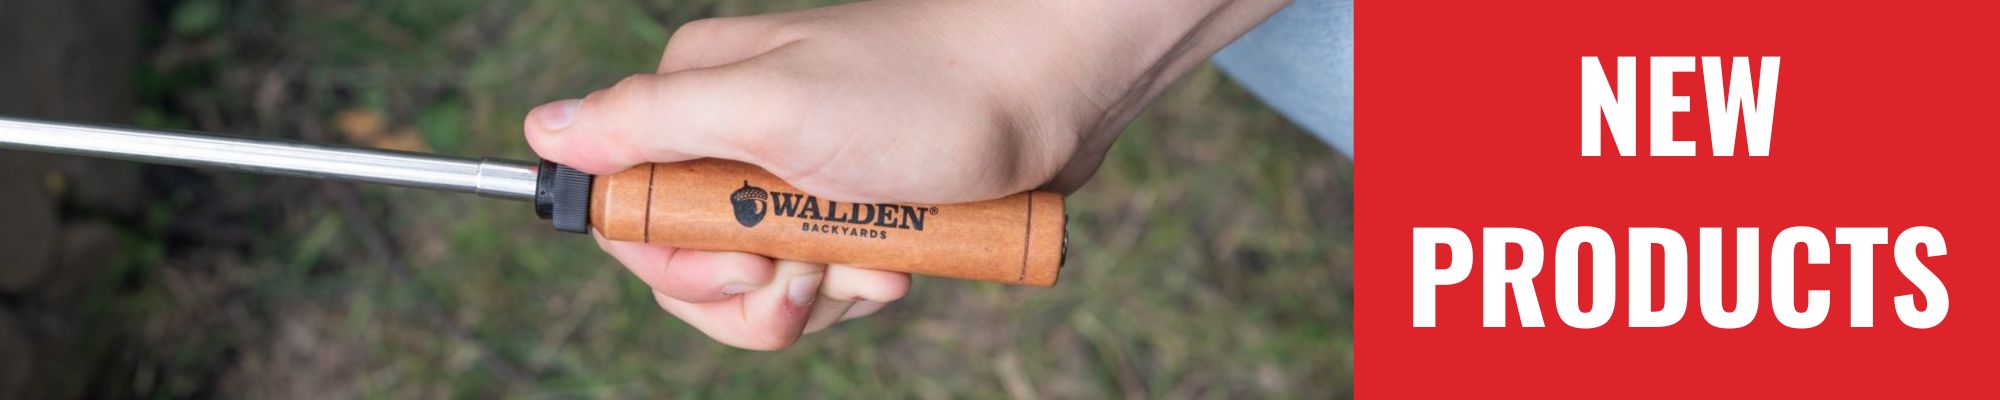 What's New at Walden?